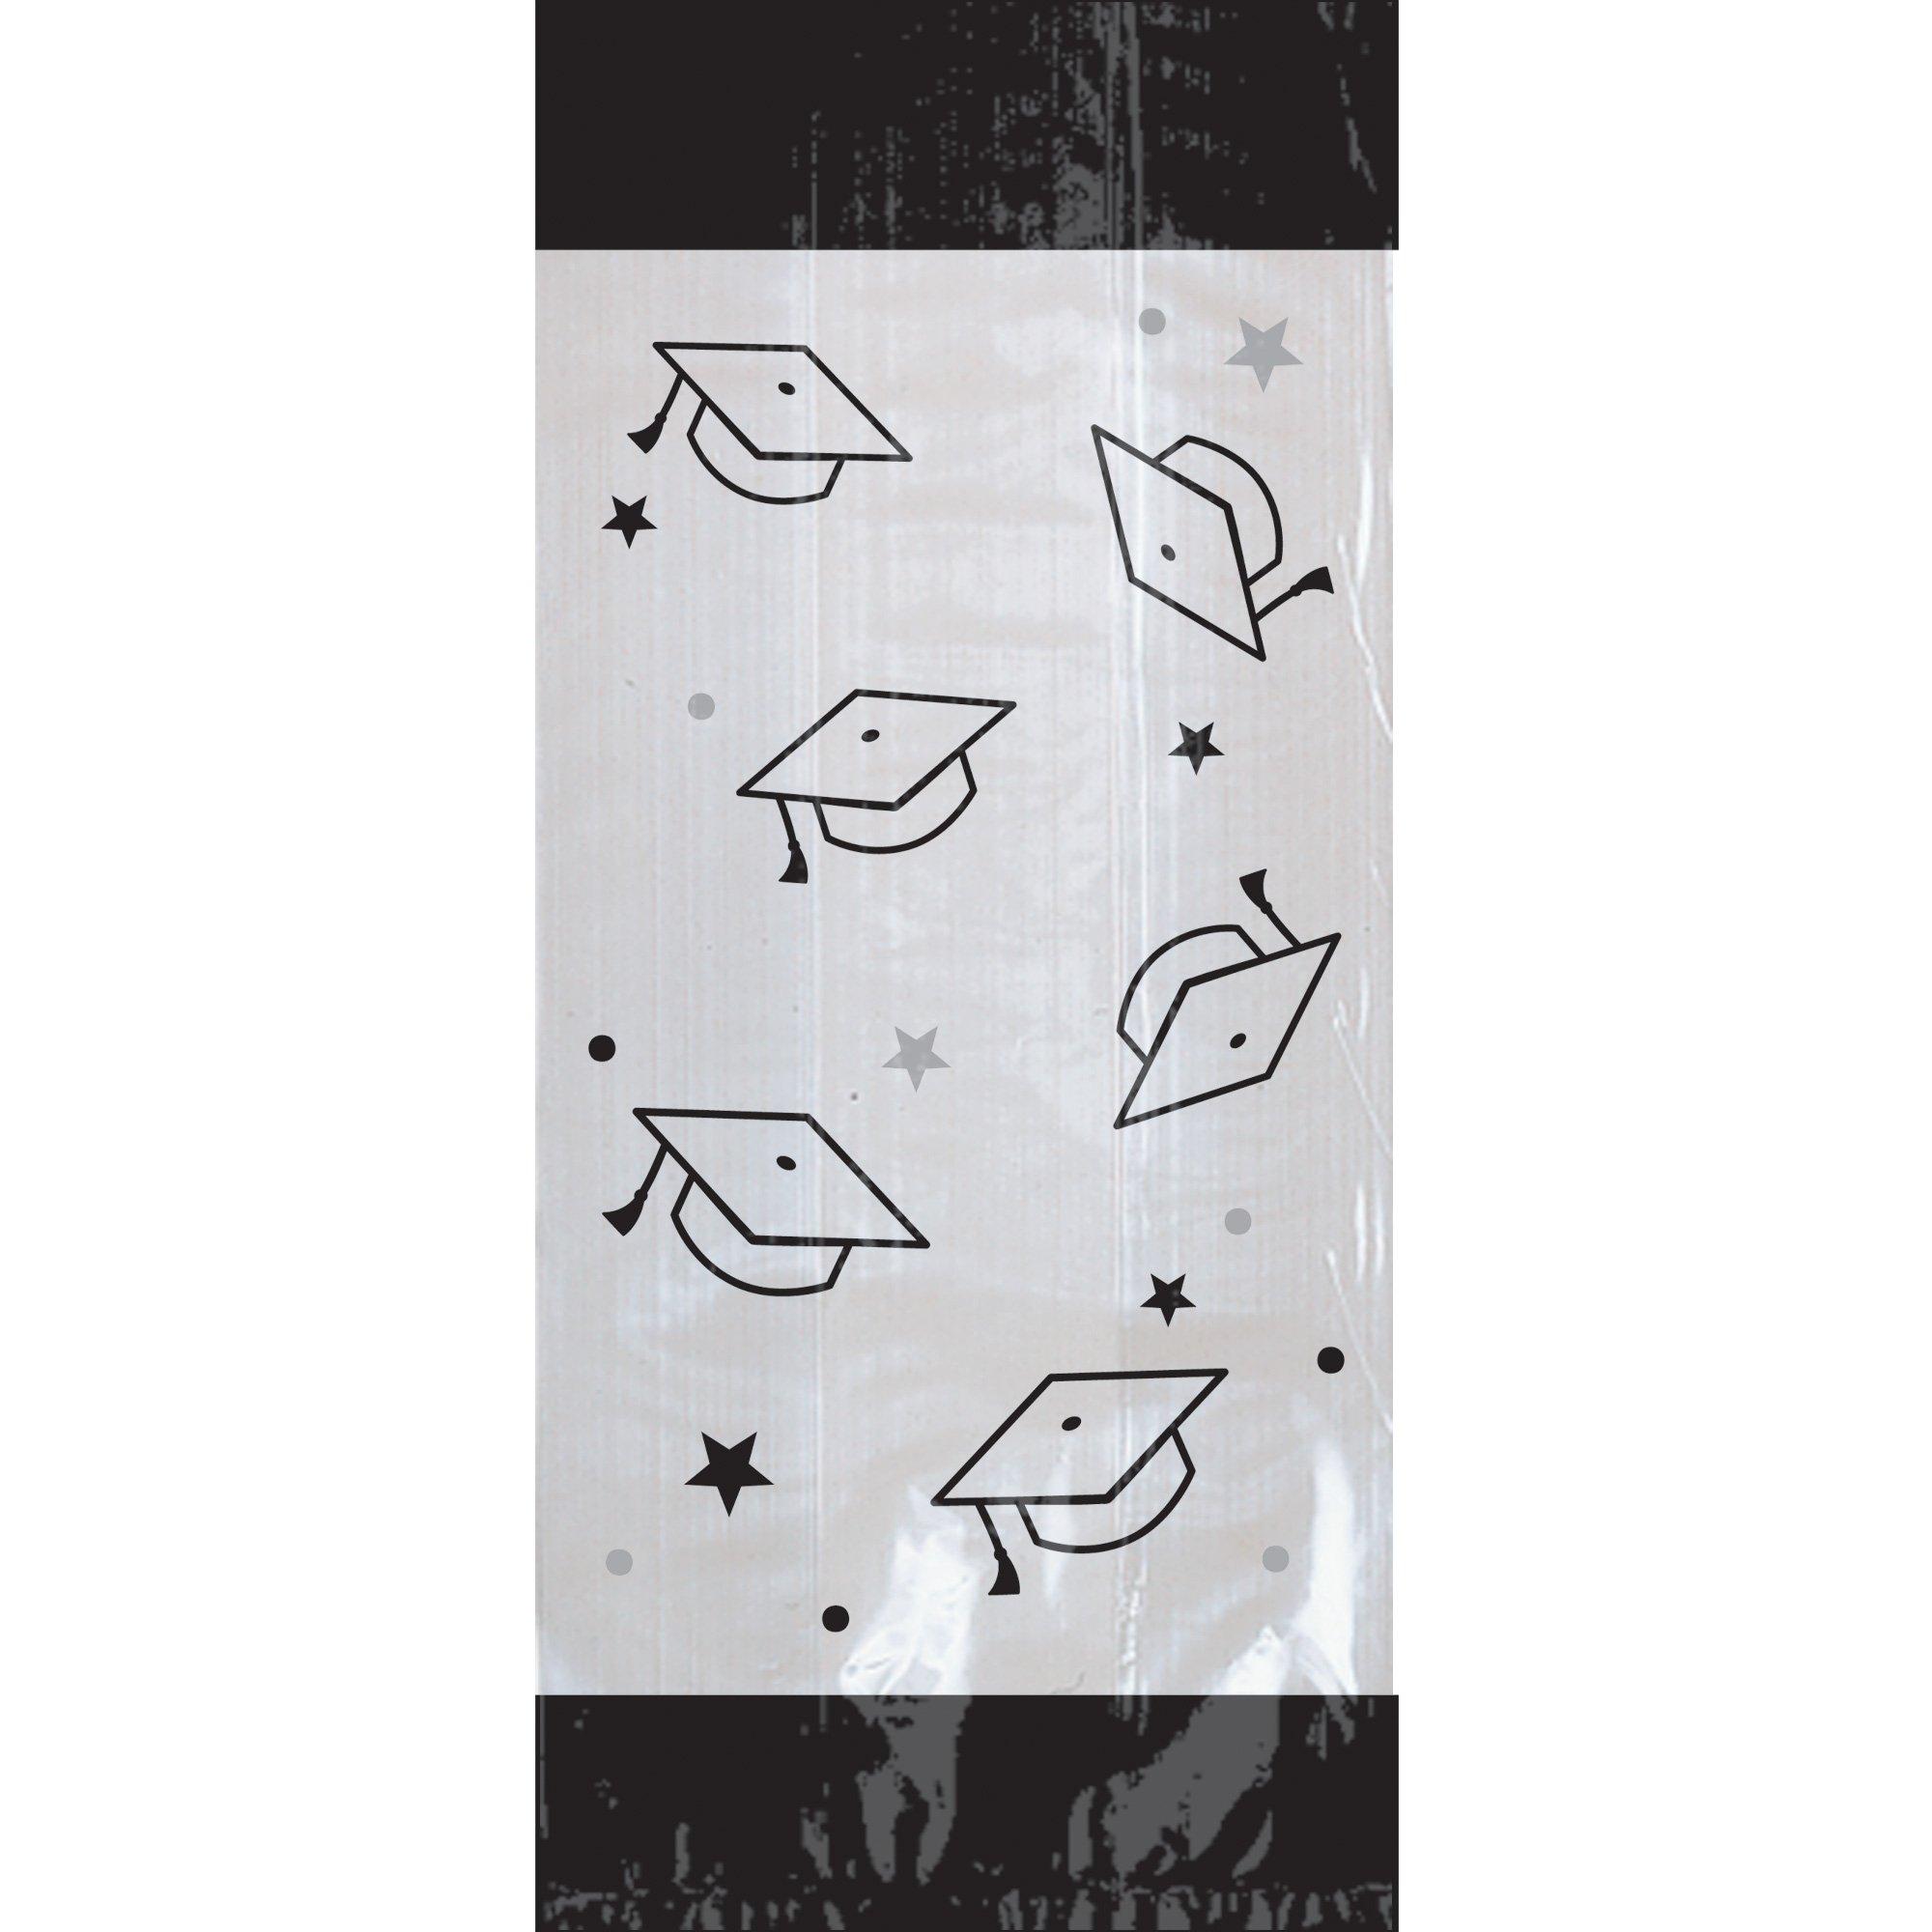 Black & Silver Mortarboard Graduation Cellophane Treat Bags, 4in x 9.5in, 20ct